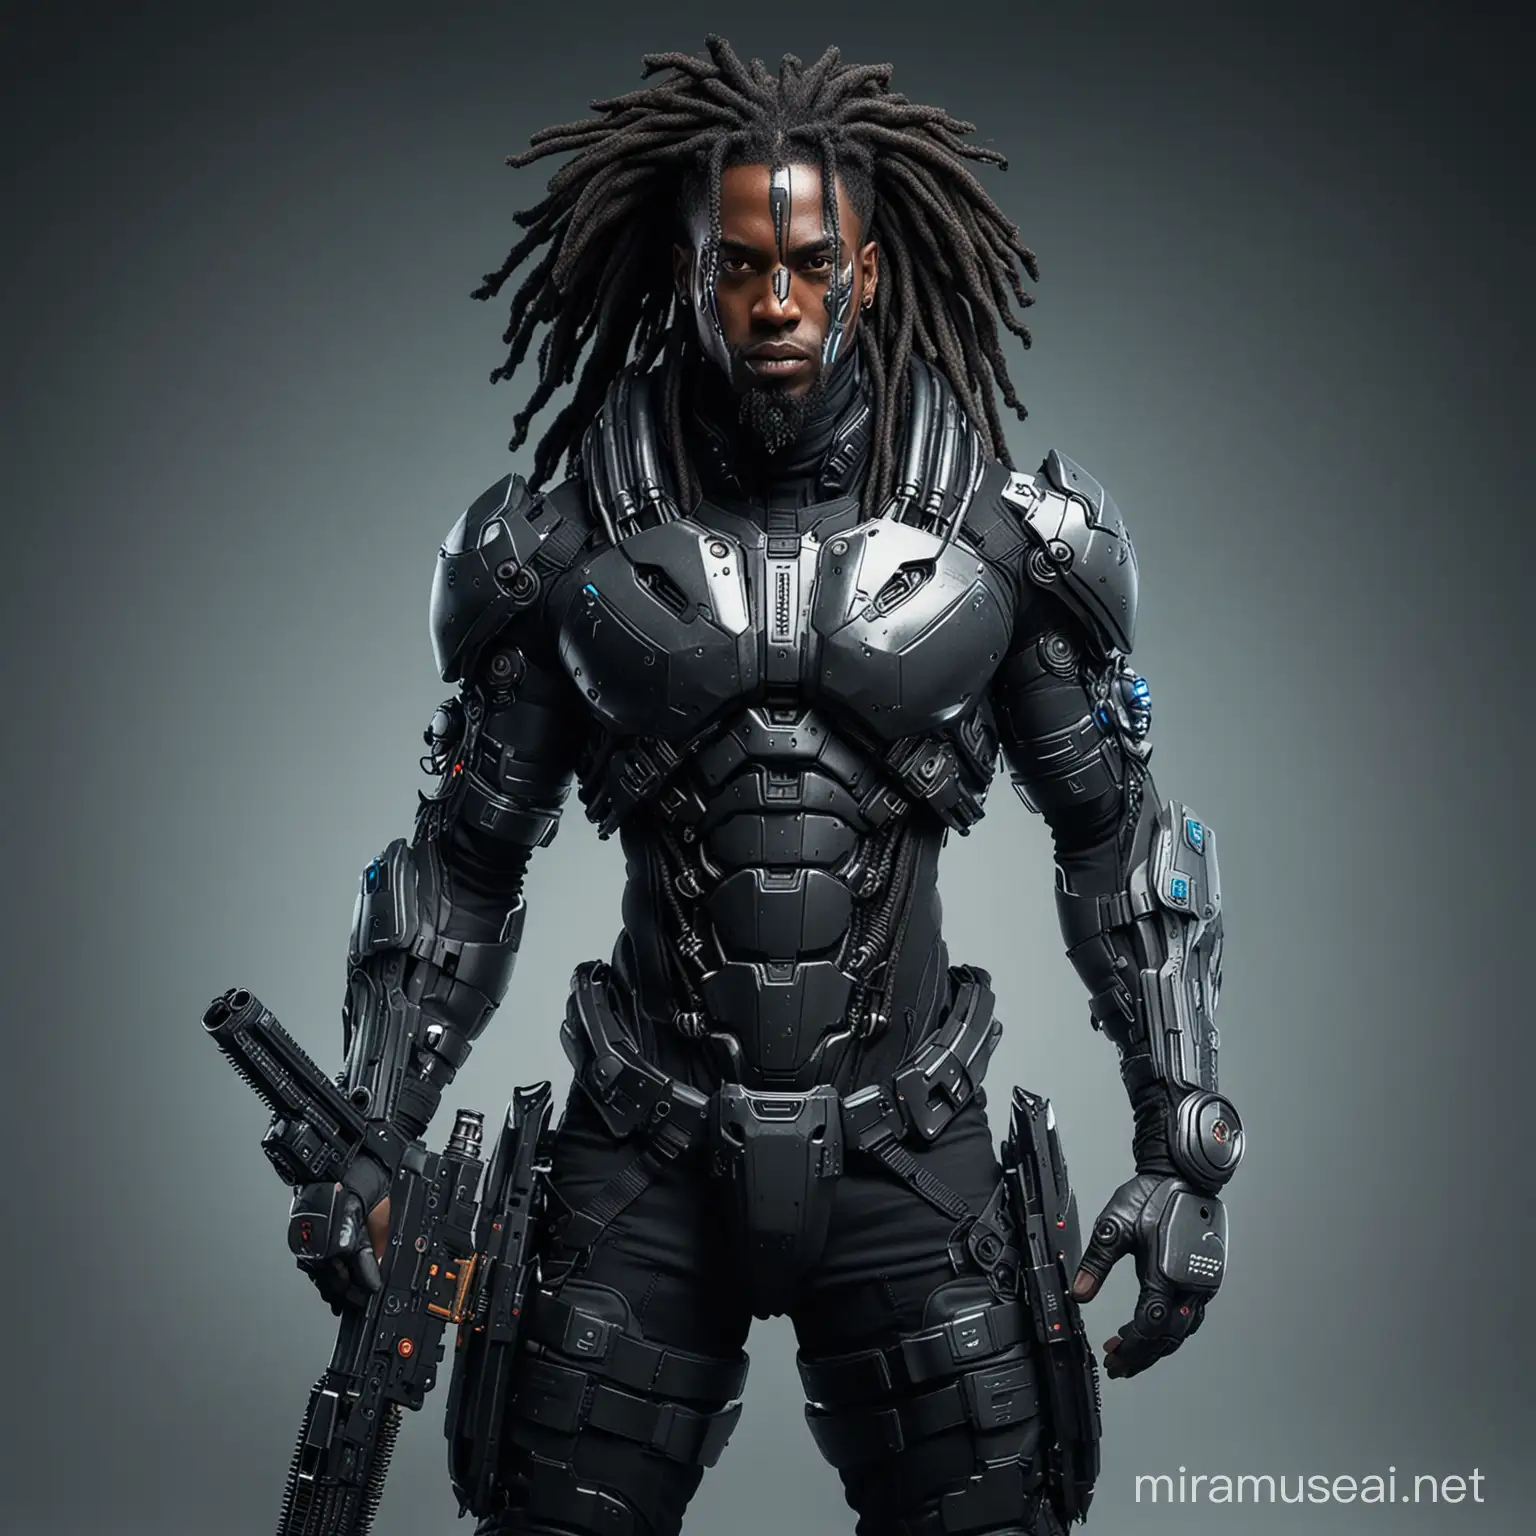 Futuristic Black Super Soldier with Cyberpunk Mask and Weapon